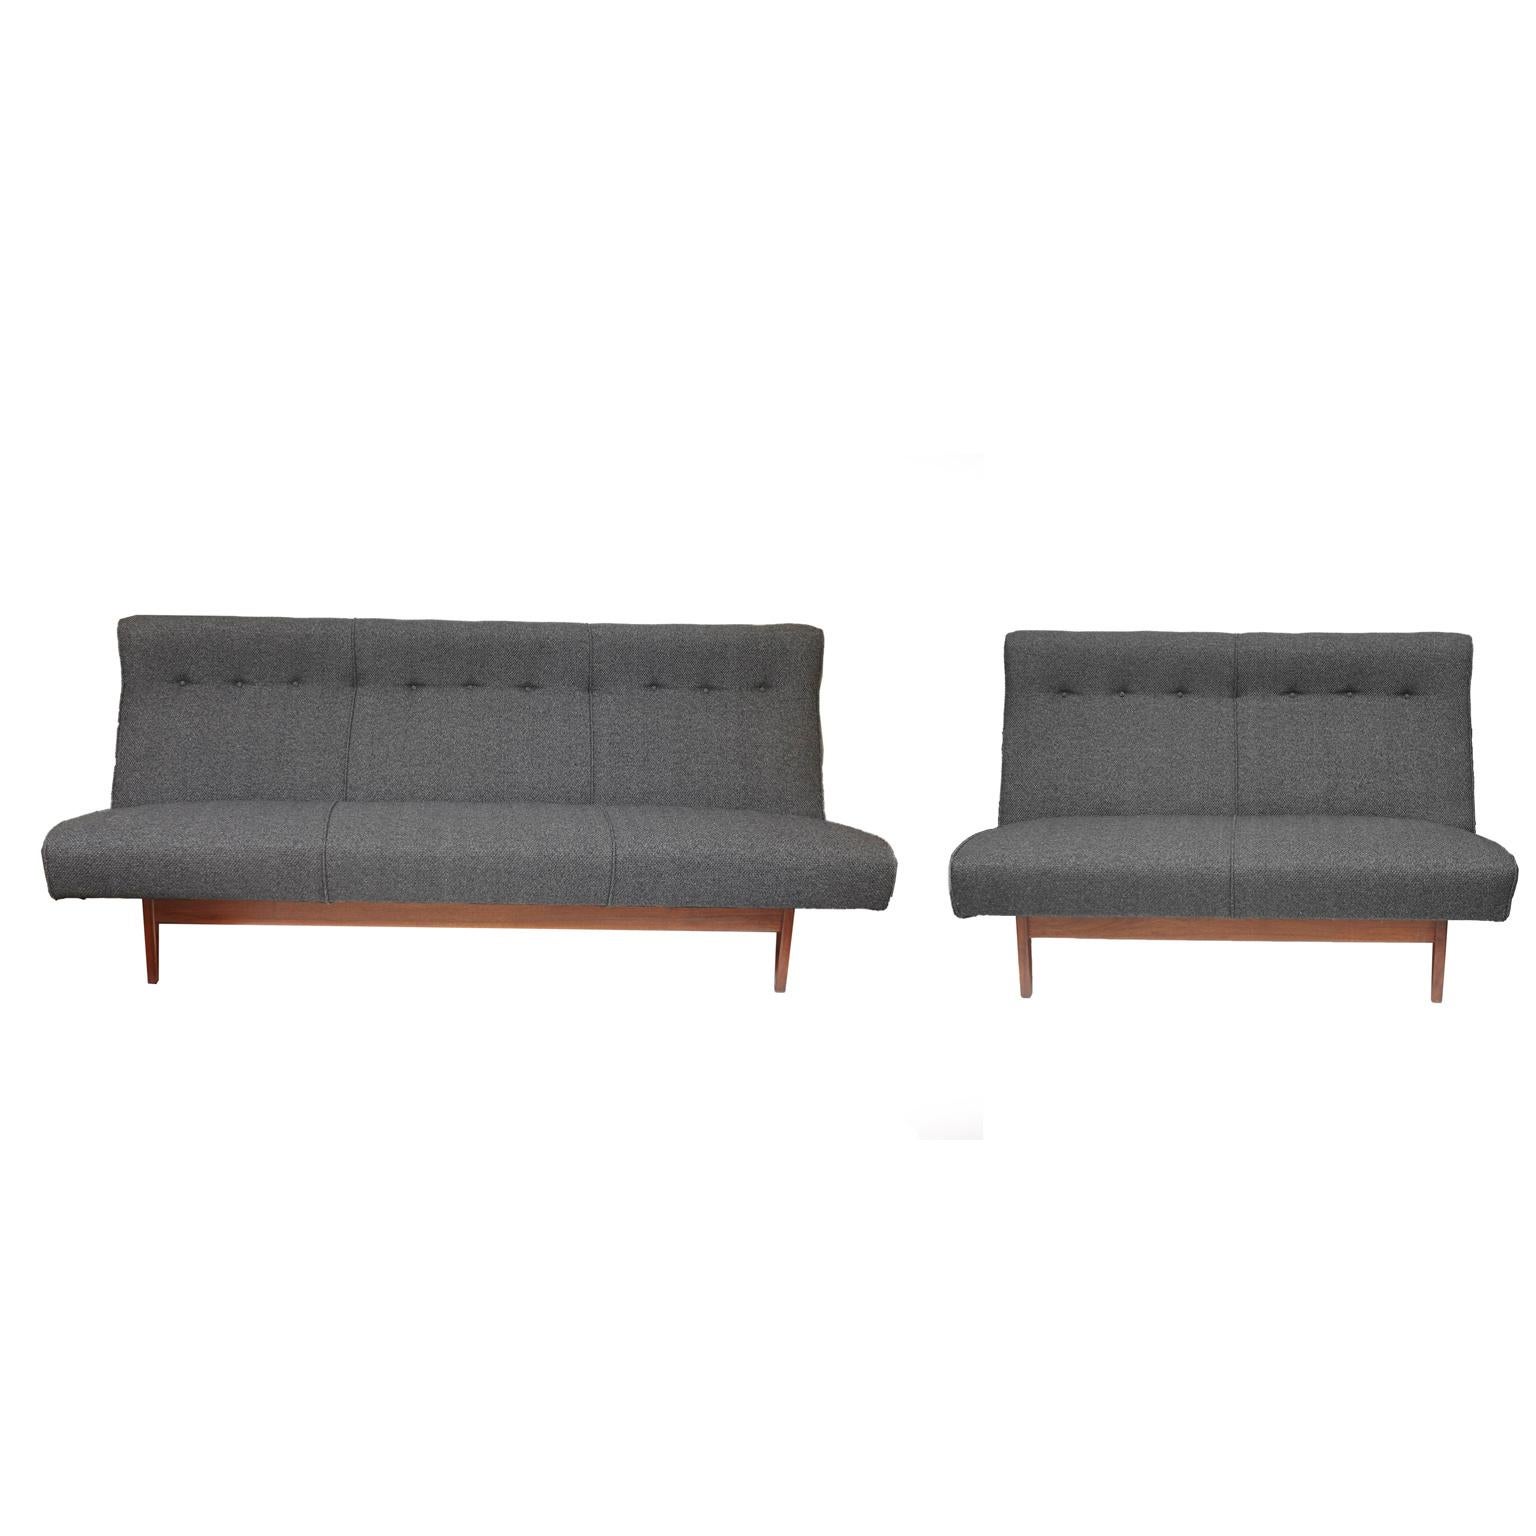 Beautiful matching Mid-Century Modern Jens Risom sofa and matching love seat. Newly upholstered in charcoal grey Kravet fabric. New foam. Hard to find matching set.